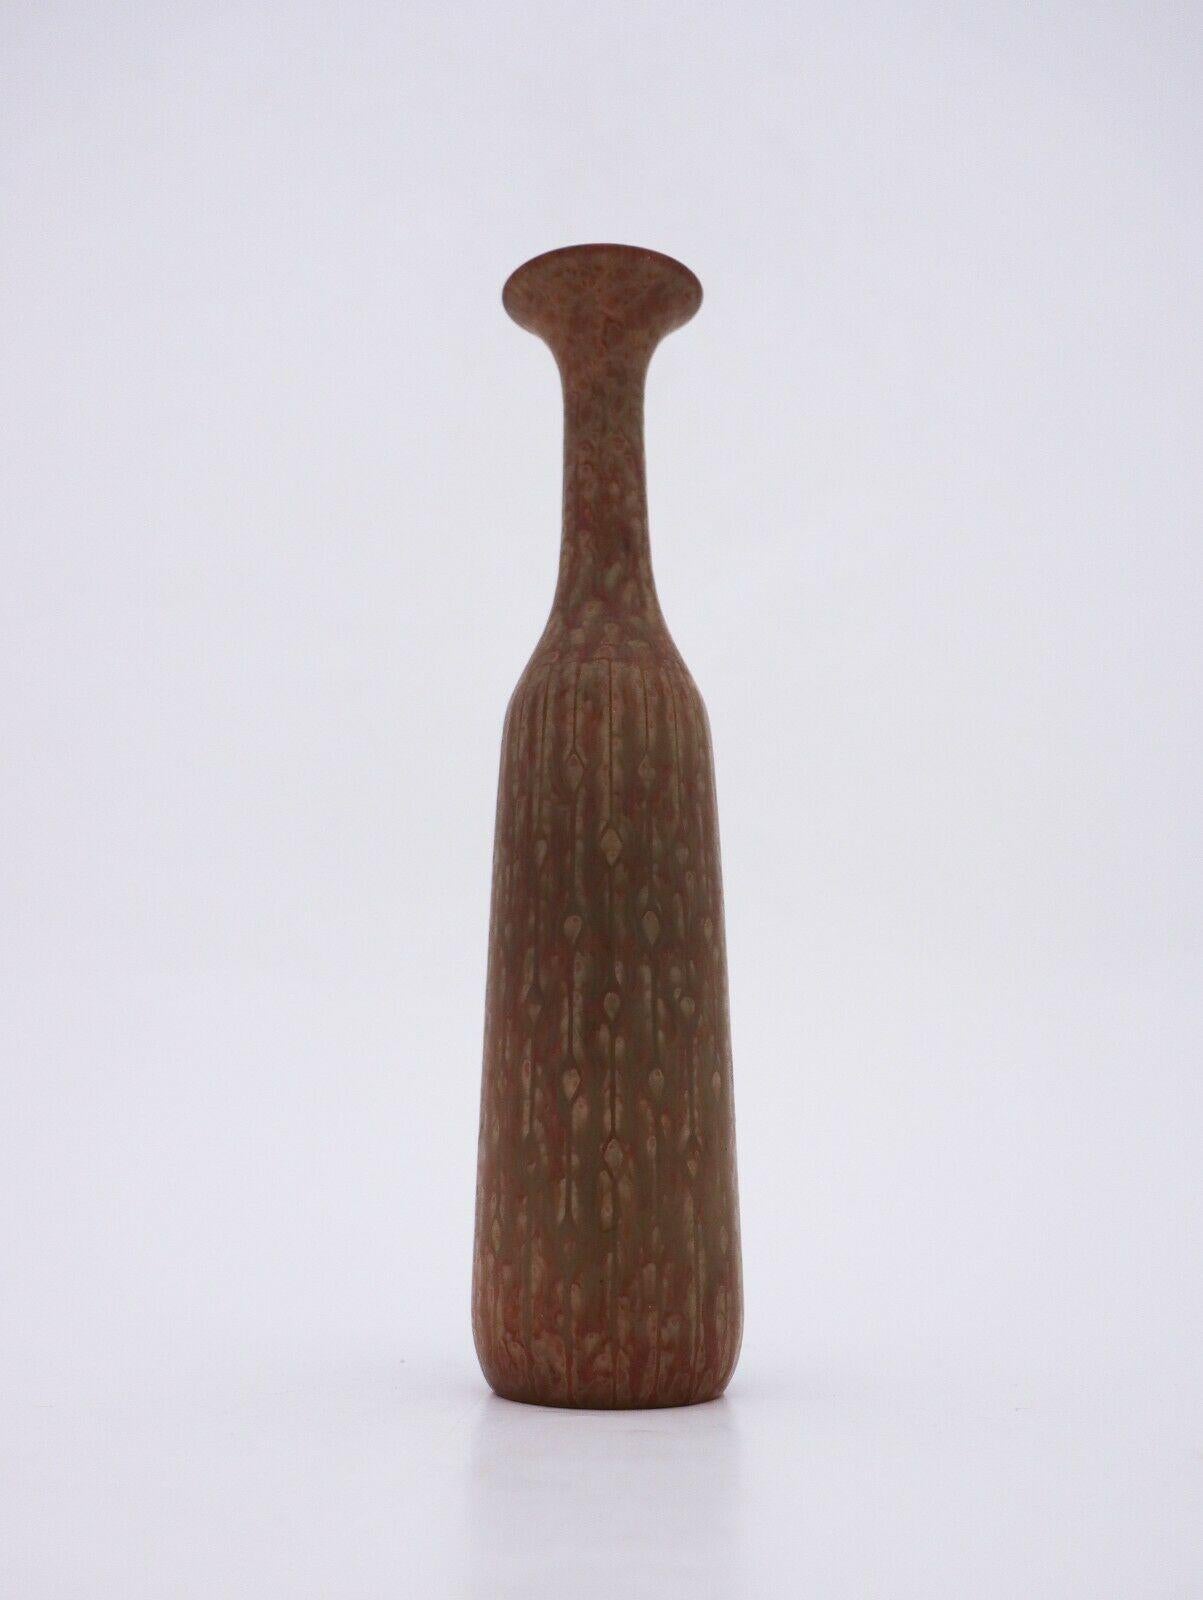 A vase with a lovely speckled glaze designed by Gunnar Nylund at Rörstrand. It is 25.5 cm high and in very good condition except from some minor marks in the glaze why it is marked as 2nd quality. 

 